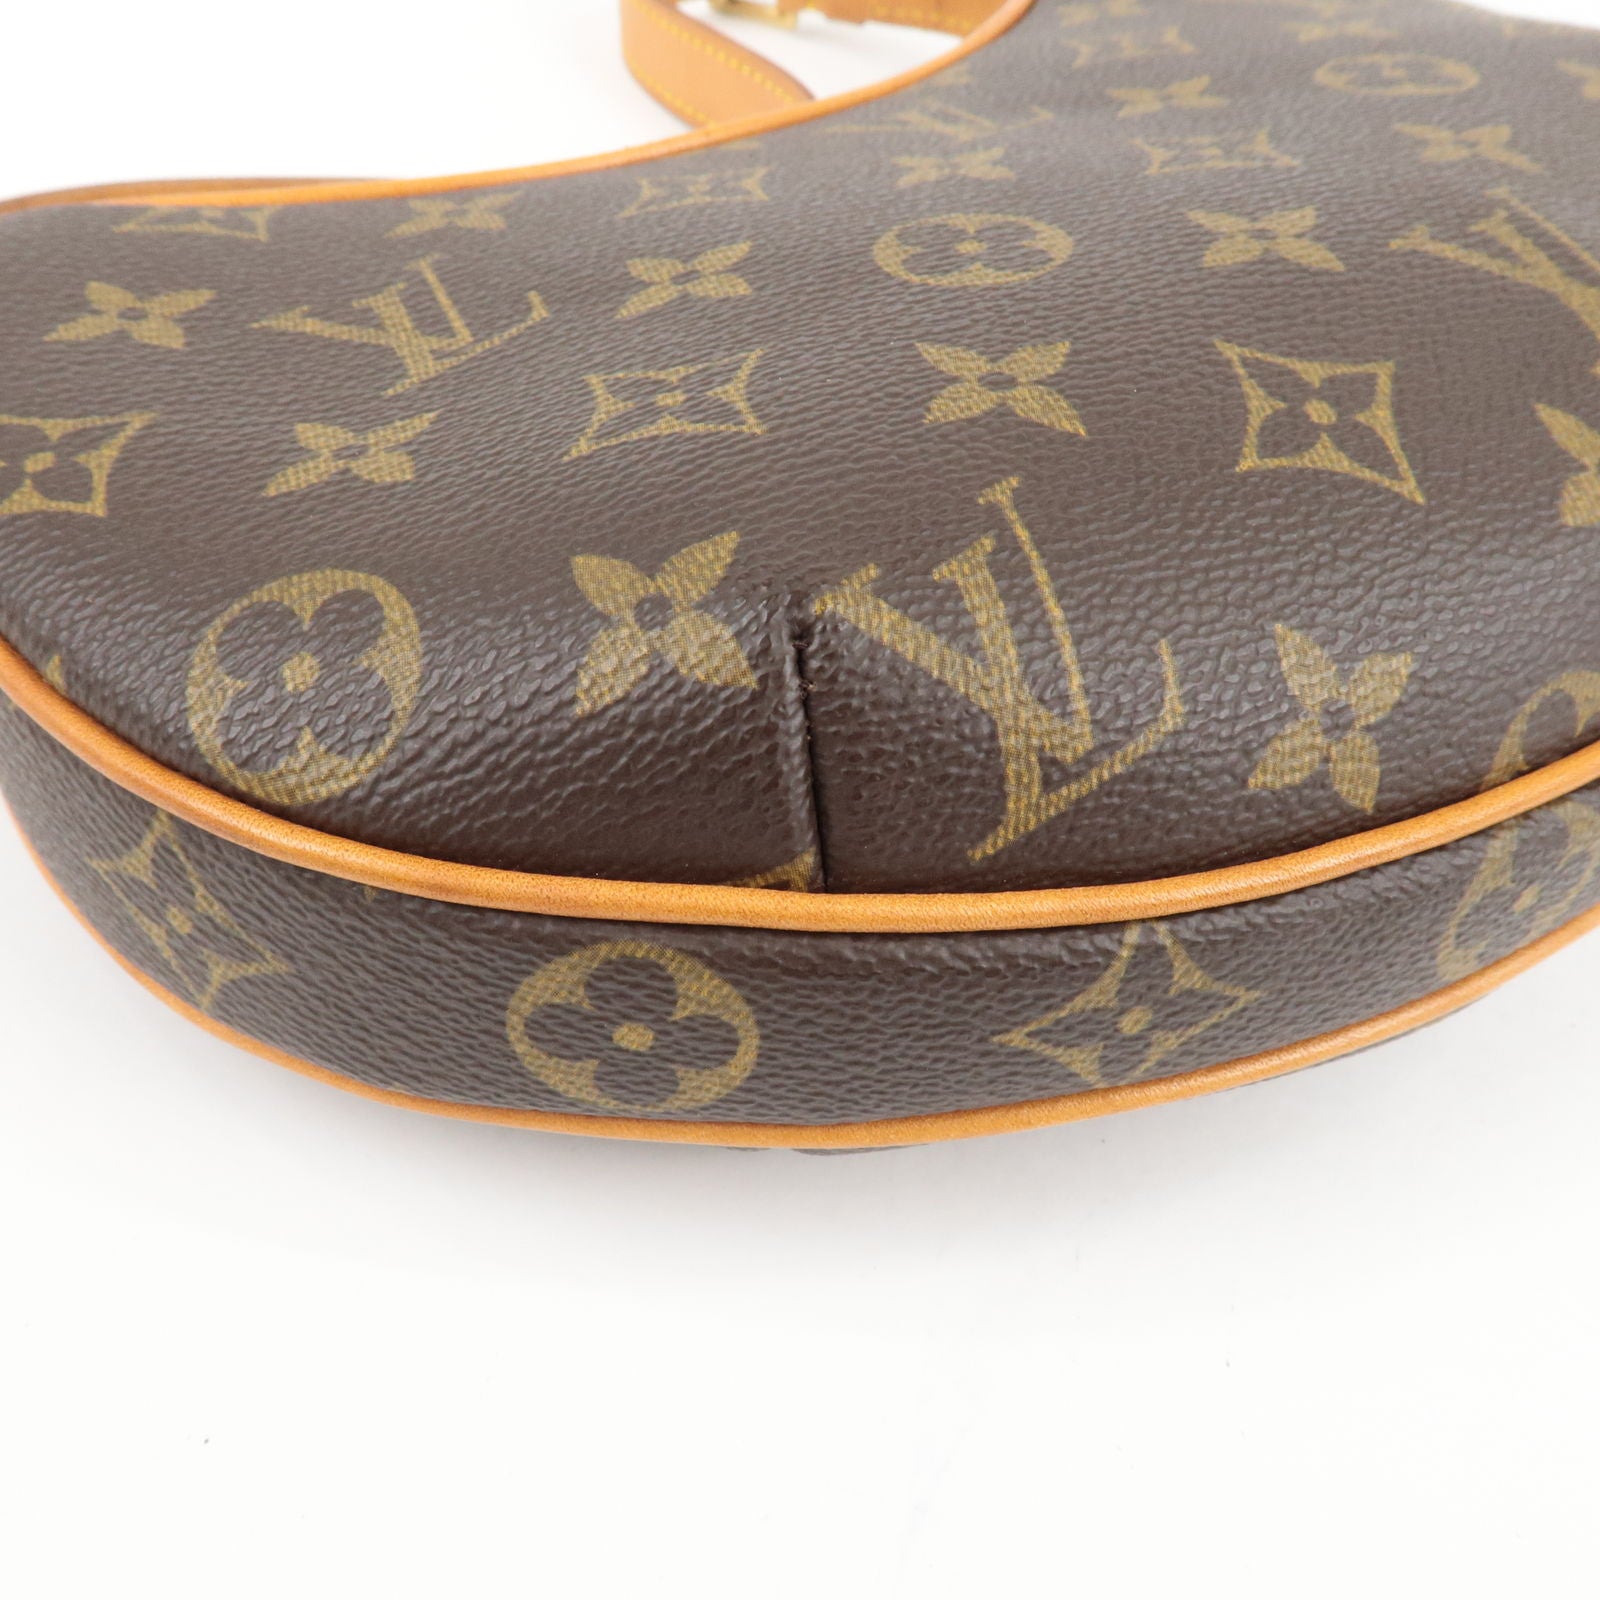 Louis Vuitton Pre-Owned 1999 pre-owned Musette Tango shoulder bag - Brown